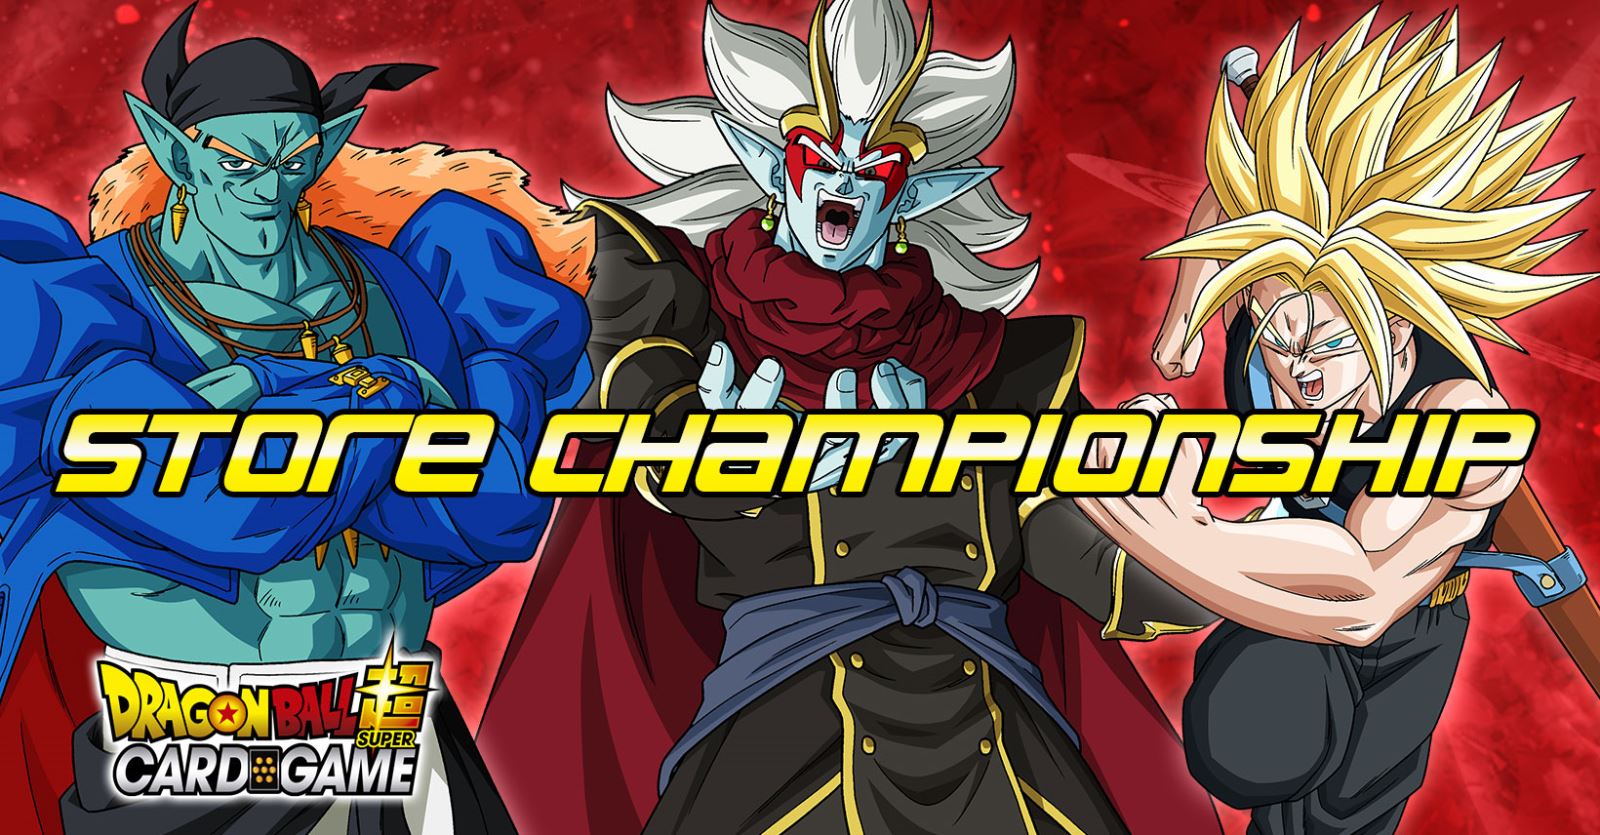 Dbs-cardgame.it - Dragon Ball Super Card Game Store Championship